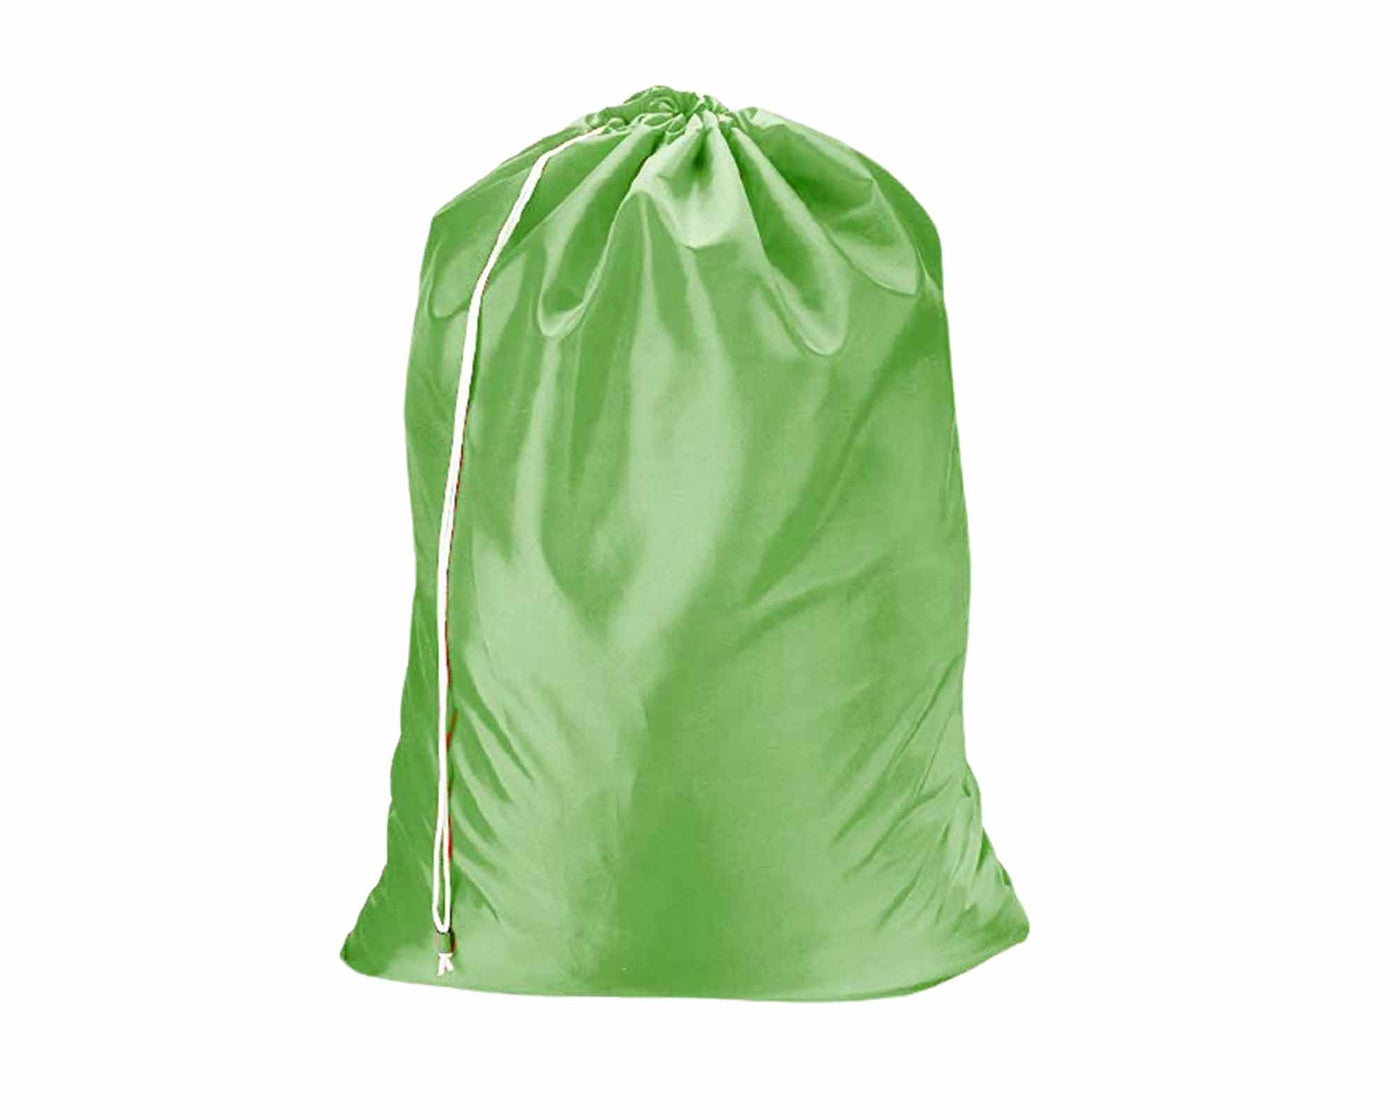 Industrial leaf green laundry bag with white draw stringd